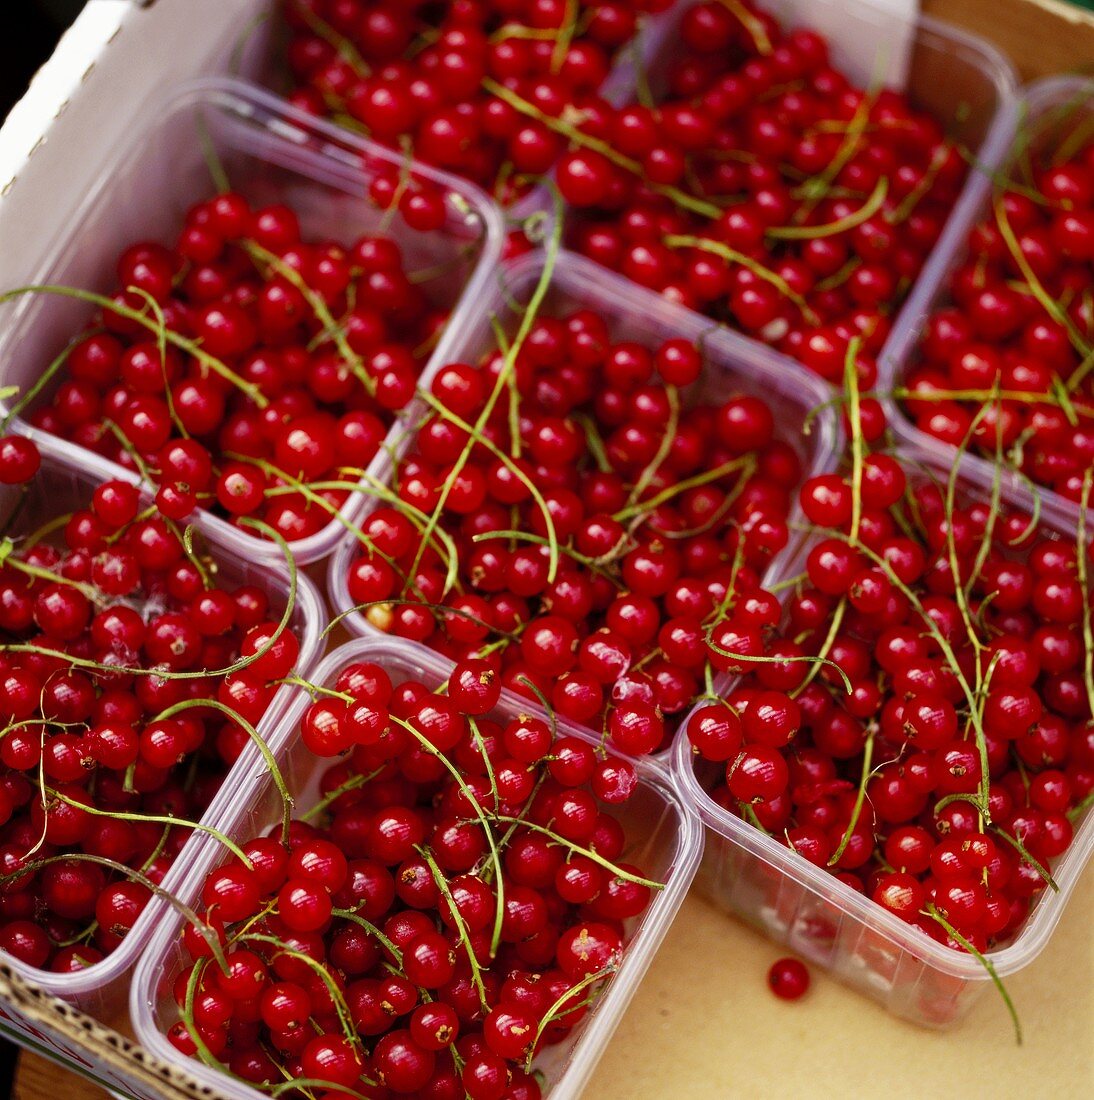 Redcurrants in plastic punnets